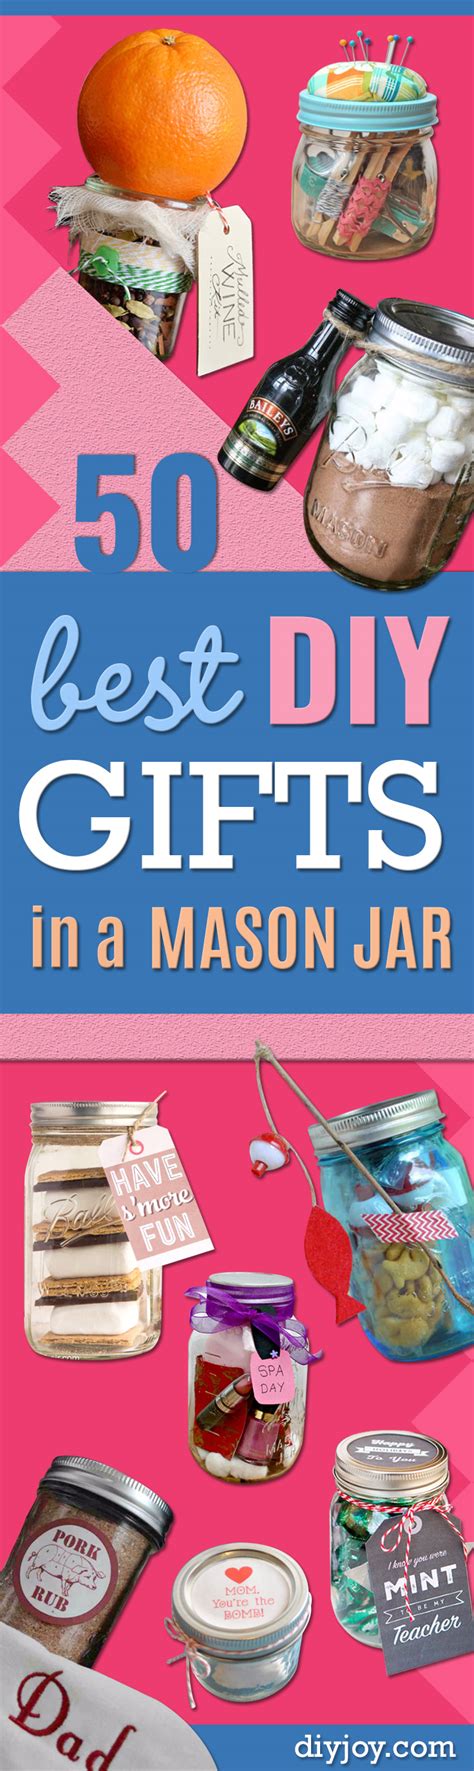 Friends are the ones you rely upon, confide in, and plague with everything from menu choices to whether or not to make things easier for you, we put together a list of unique, thoughtful gifts that your best friend would. 50 Best DIY Gifts in Mason Jars